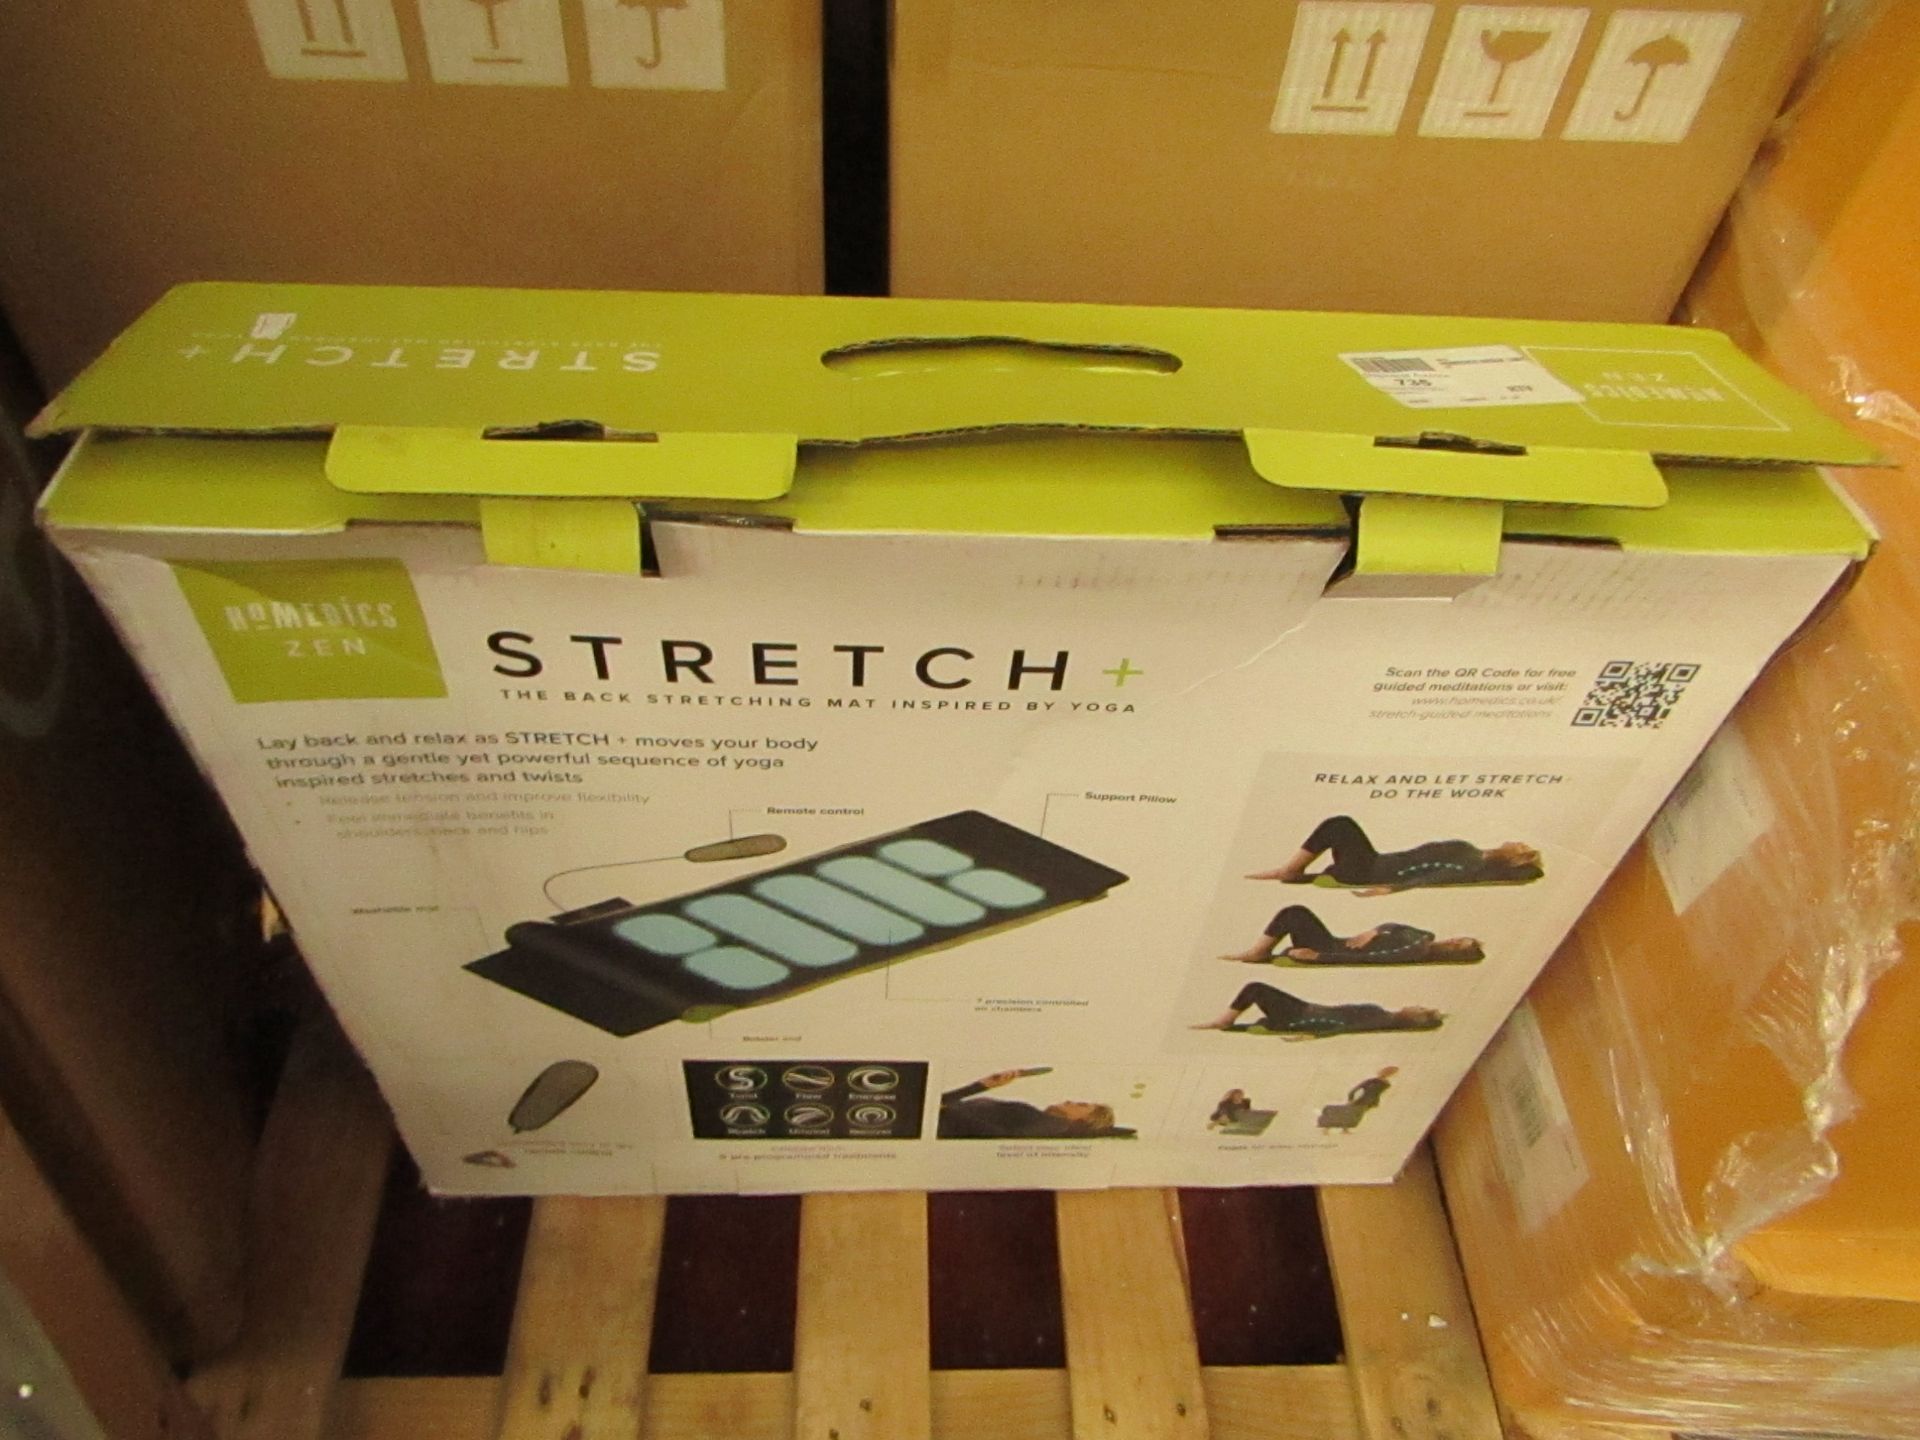 Stretch Plus stretching mat, unchecked and boxed.